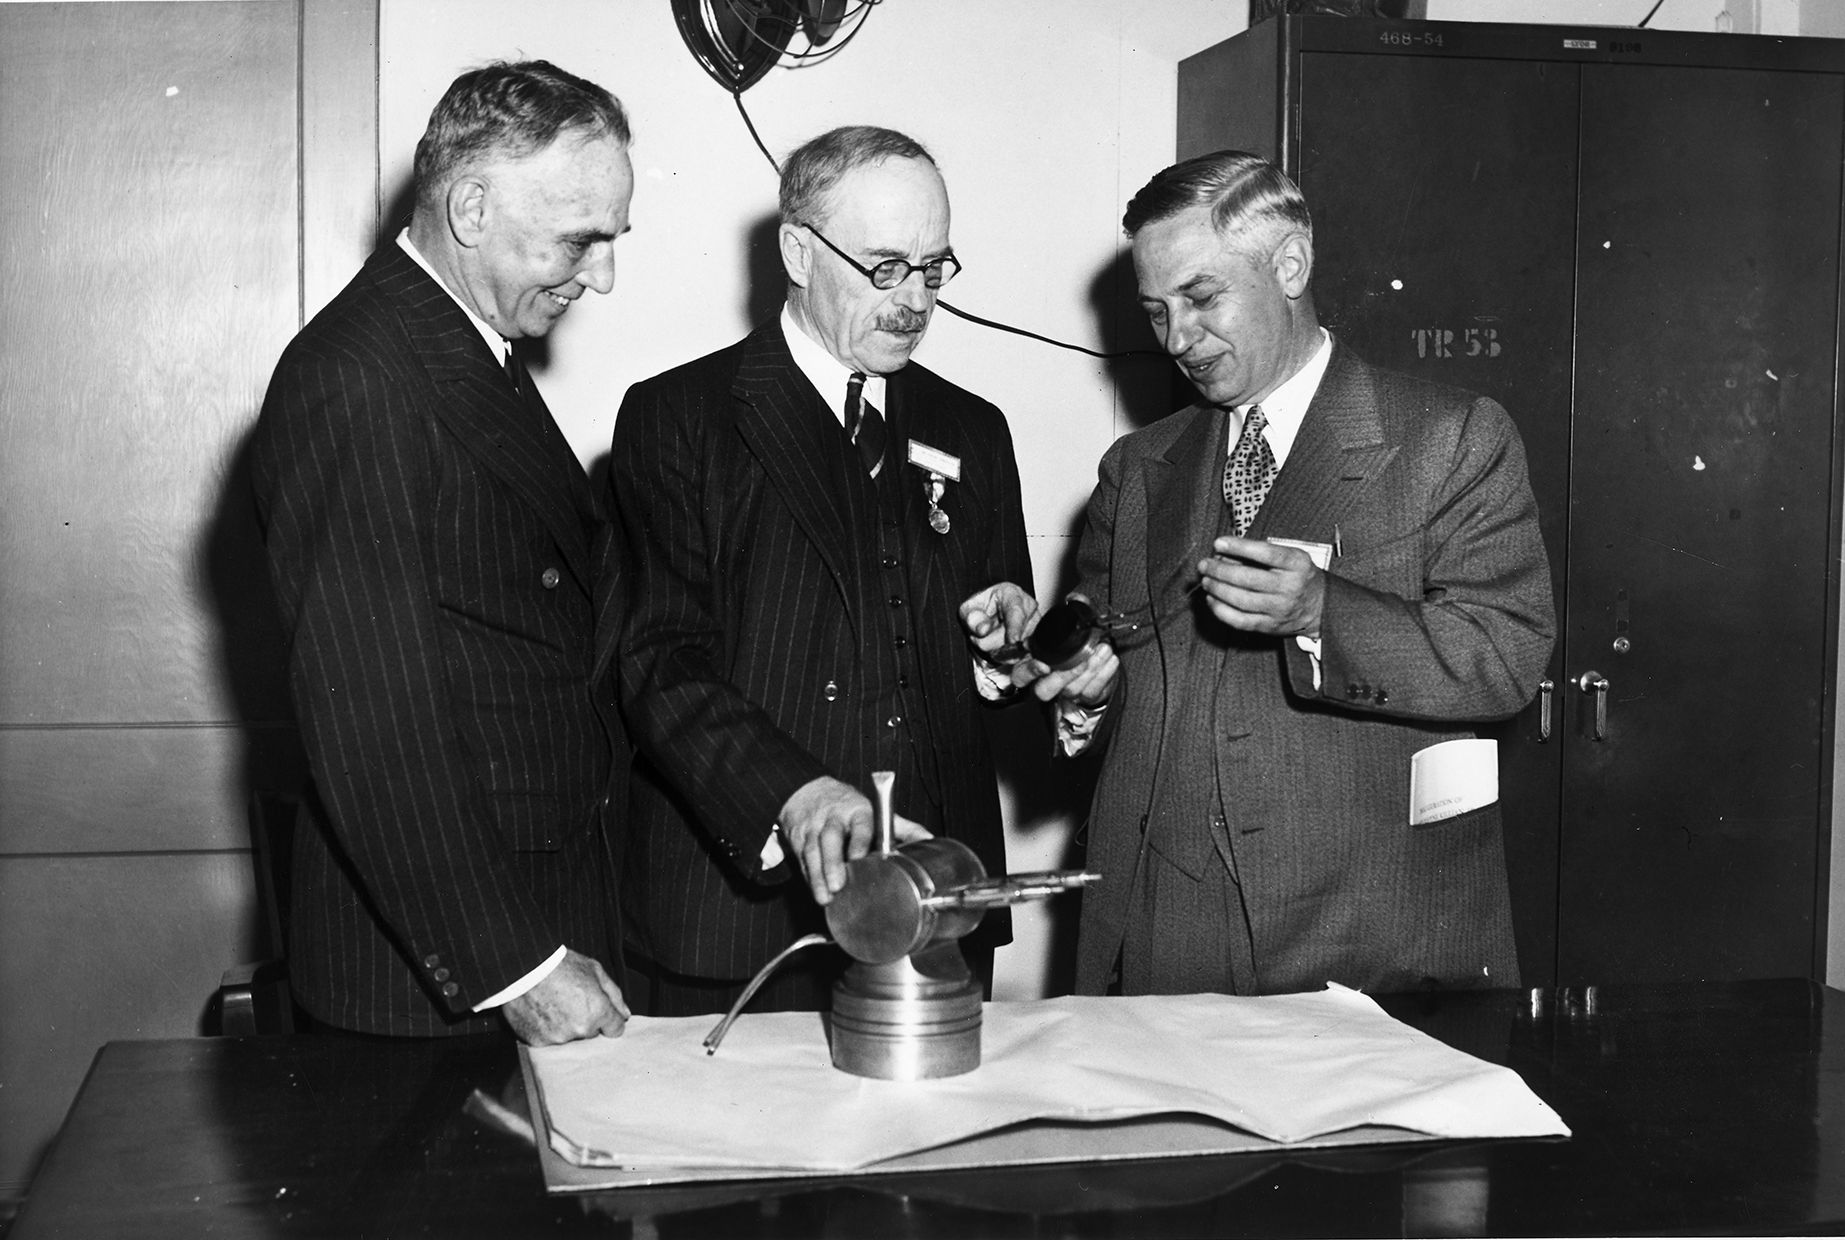 Henry Thomas Tizard, Alfred L. Loomis, and Lee Alvin-DuBridge examine a magnetron on a table in front of them in this image. The three scientists were involved in the development of airborne radar for the Allies during World War II.